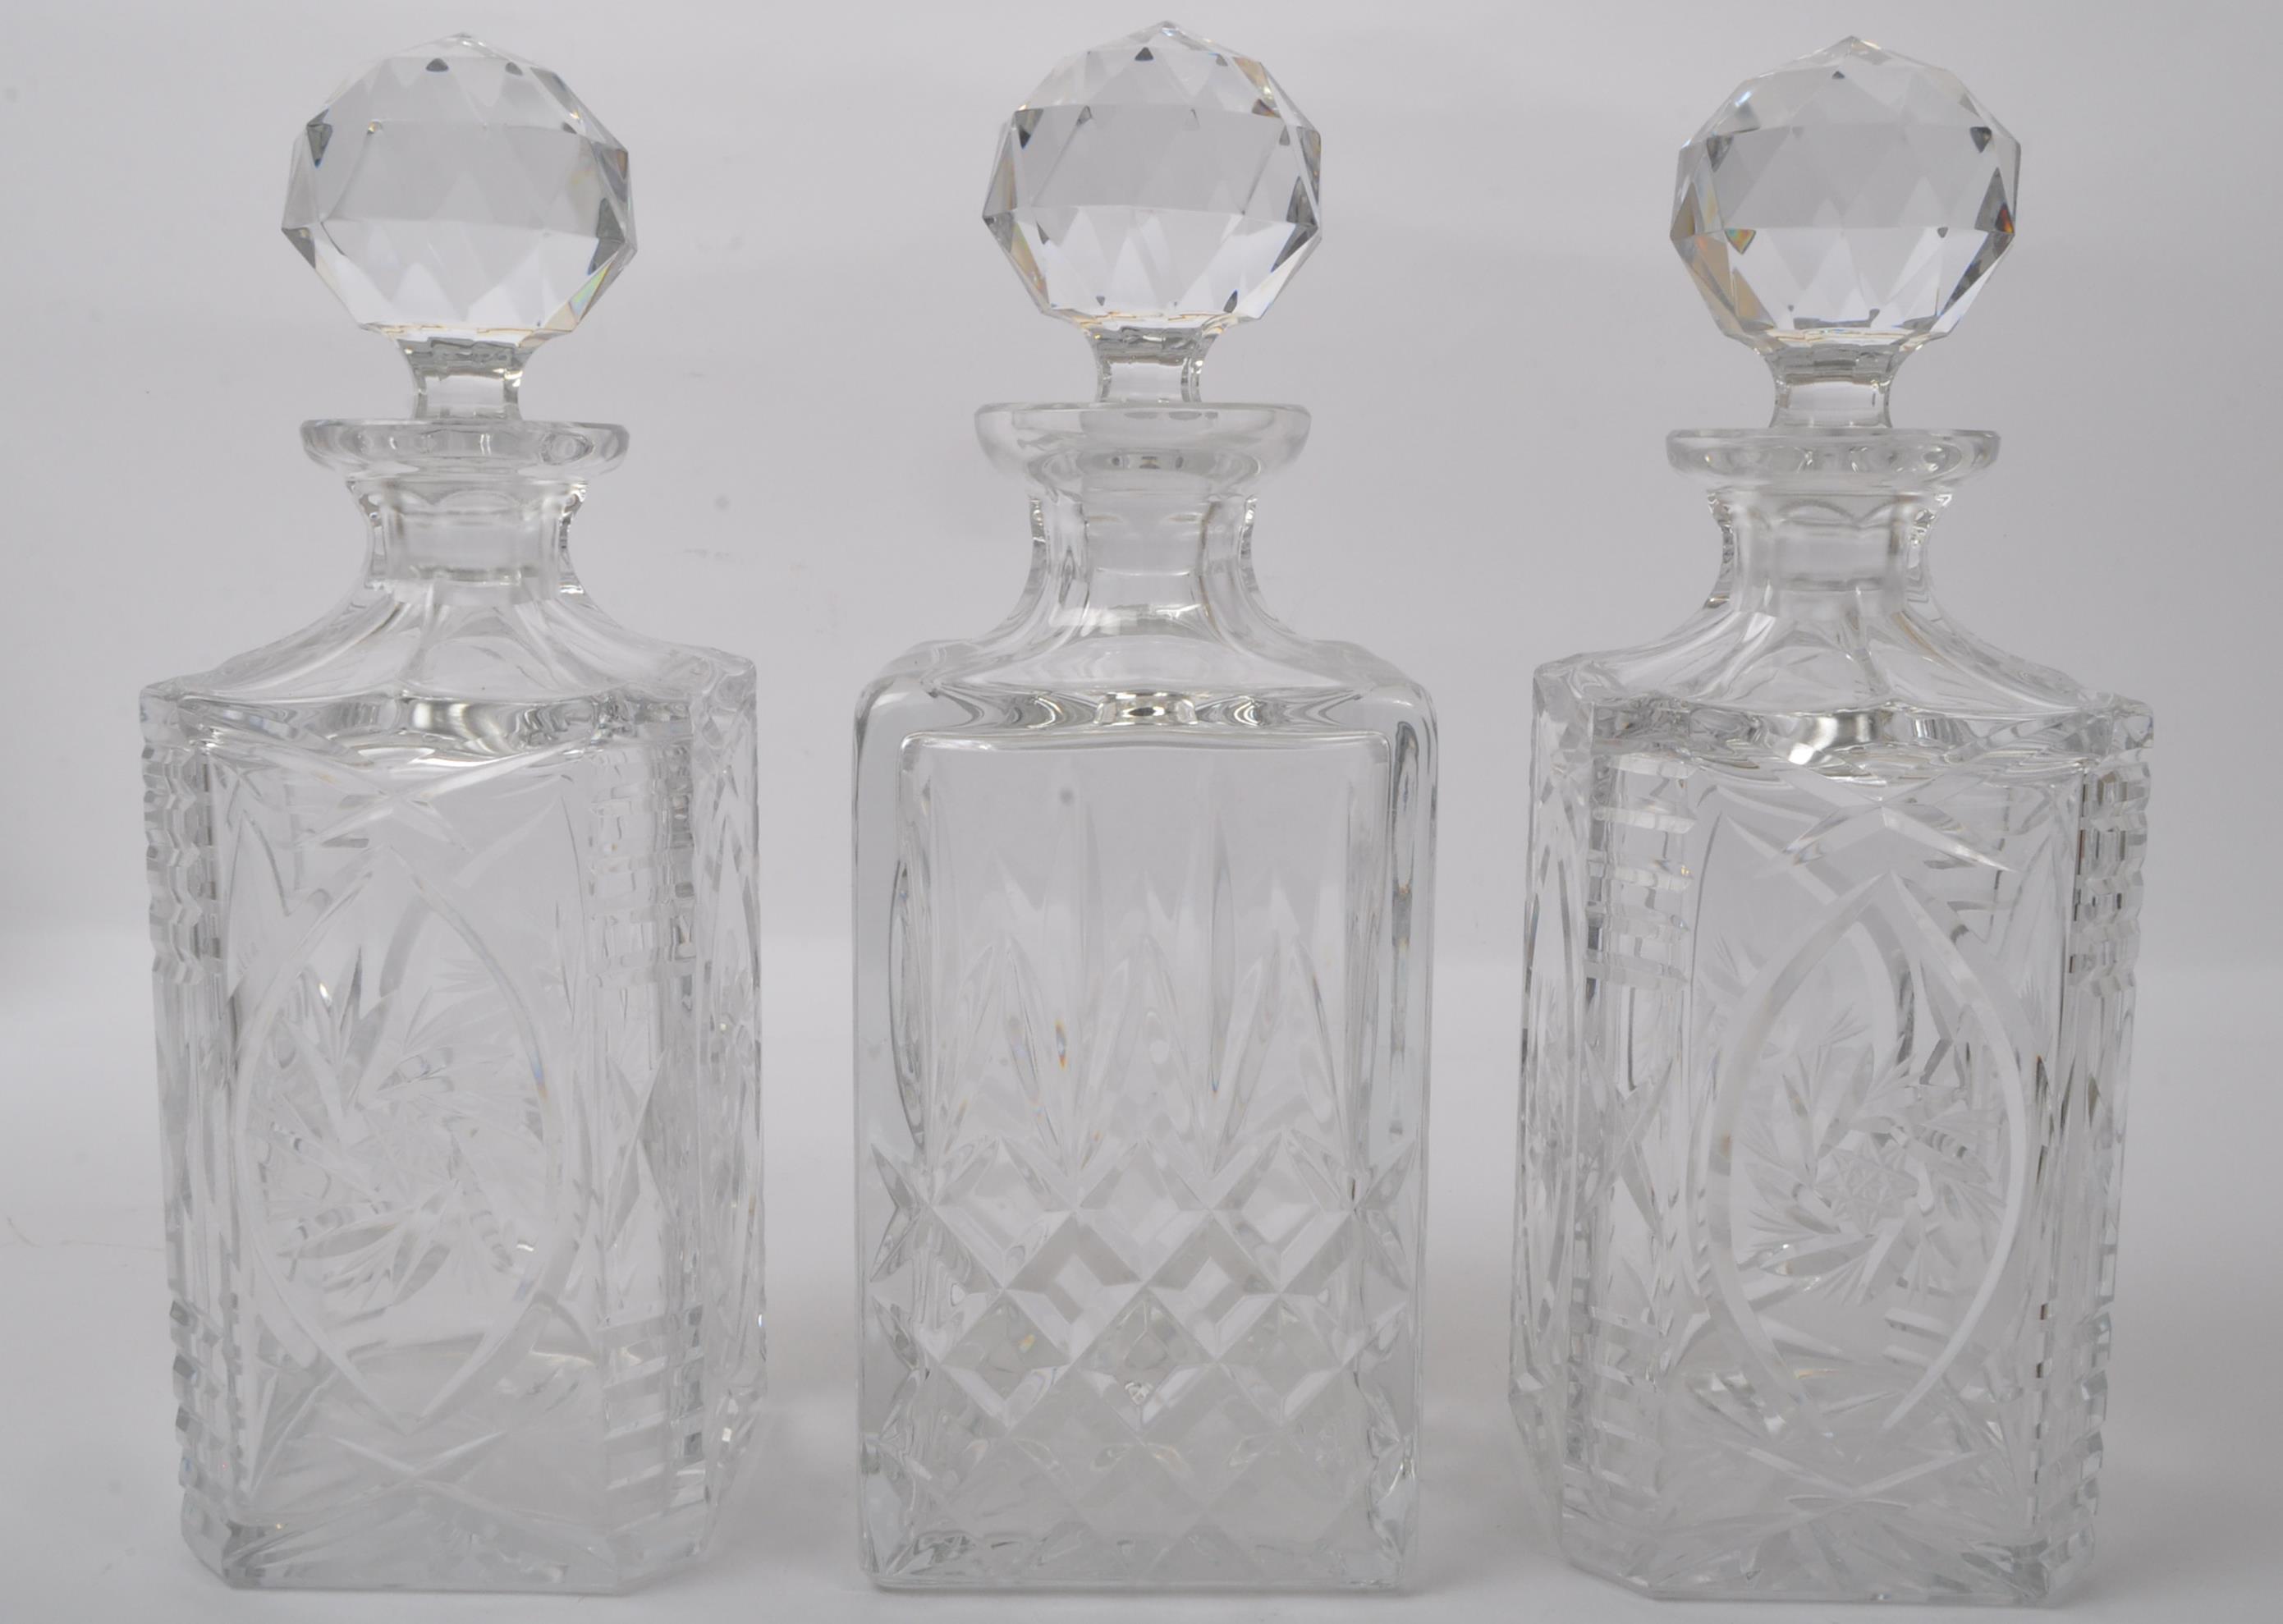 EIGHT LARGE VINTAGE CUT GLASS DECANTERS - Image 2 of 6